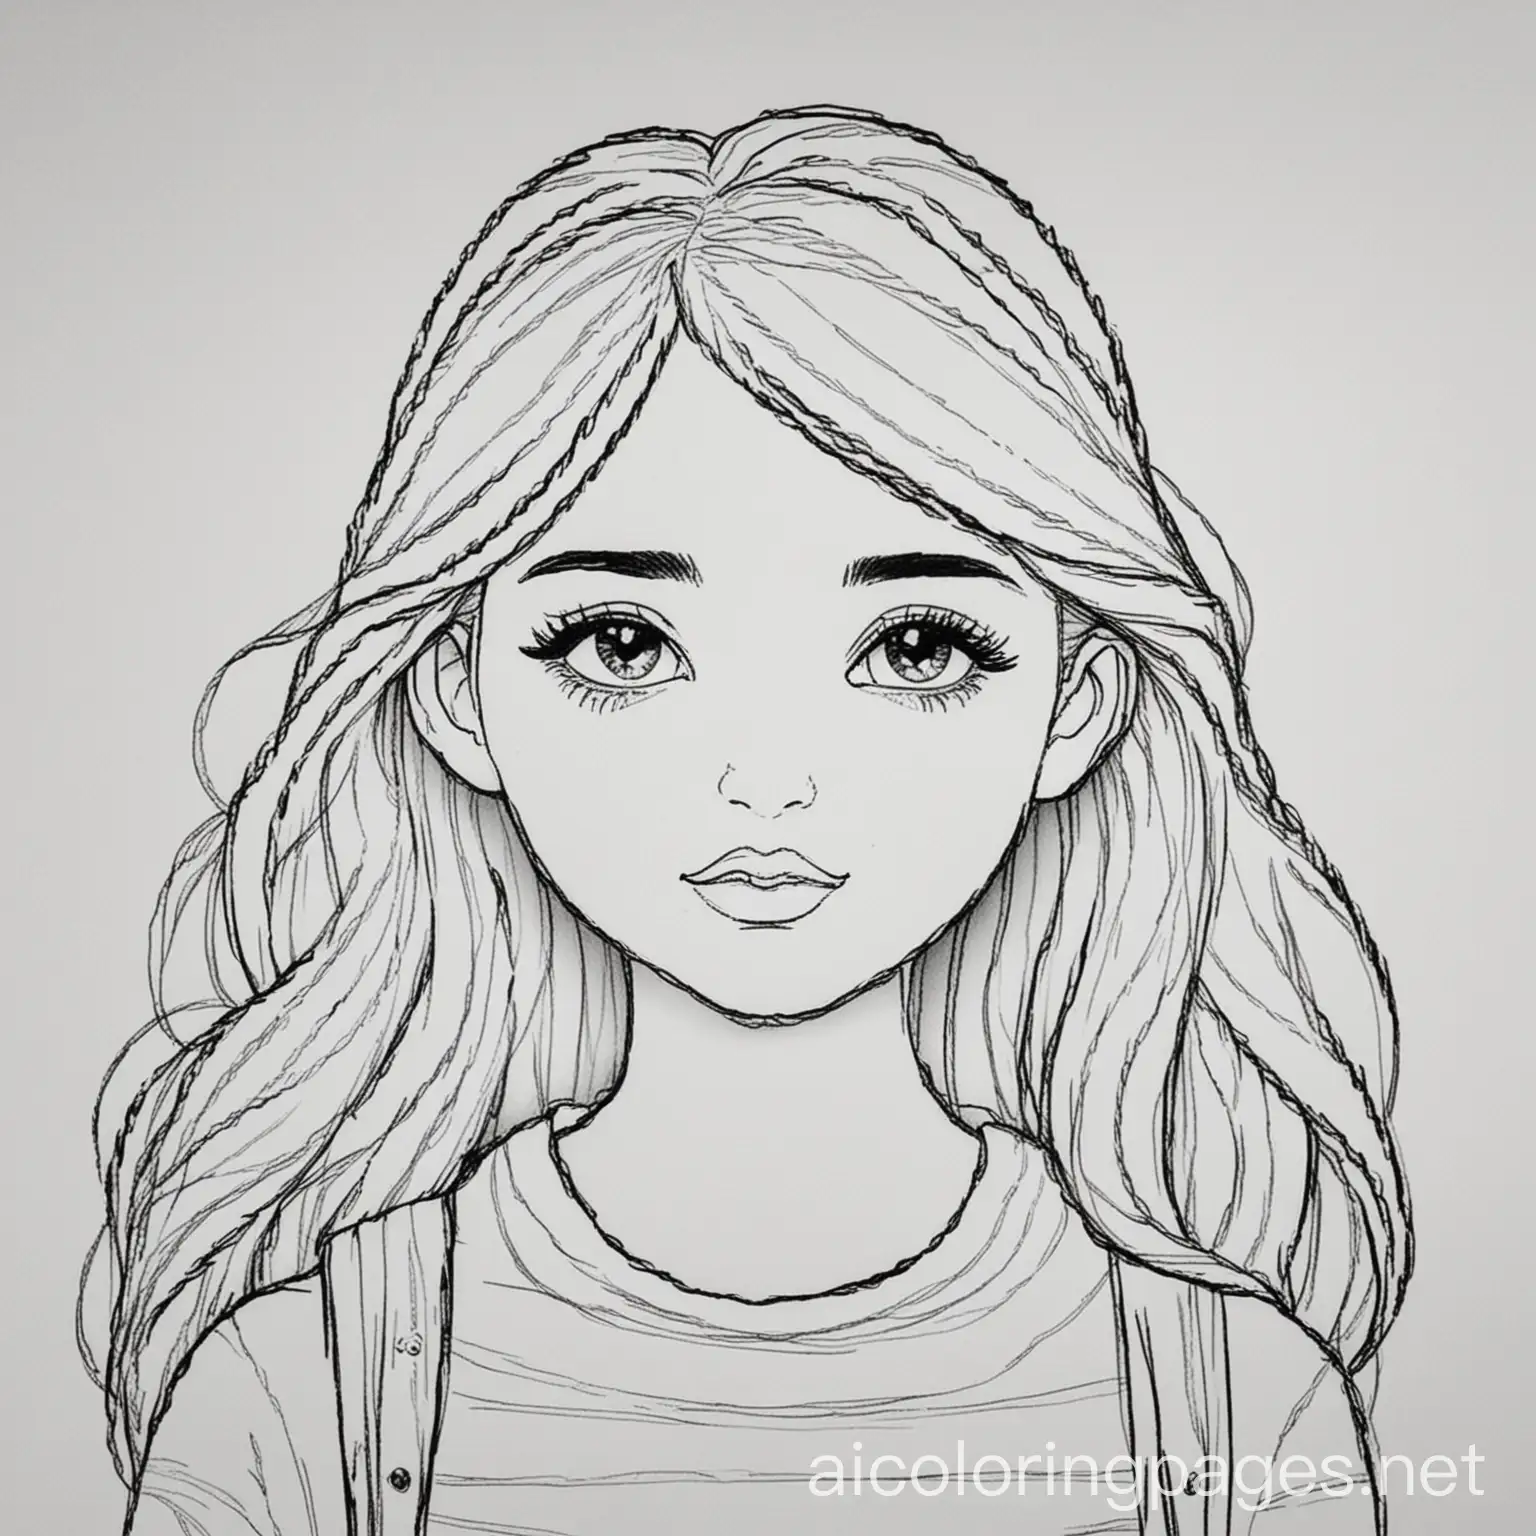 One teen in a plain white background, Coloring Page, black and white, bold thick marker outline art, Simplicity, Ample White Space. The background of the coloring page is plain white to make it easy for young children to color within the lines. The outlines of all the subjects are easy to distinguish, making it simple for kids to color without too much difficulty, Coloring Page, black and white, line art, white background, Simplicity, Ample White Space. The background of the coloring page is plain white to make it easy for young children to color within the lines. The outlines of all the subjects are easy to distinguish, making it simple for kids to color without too much difficulty